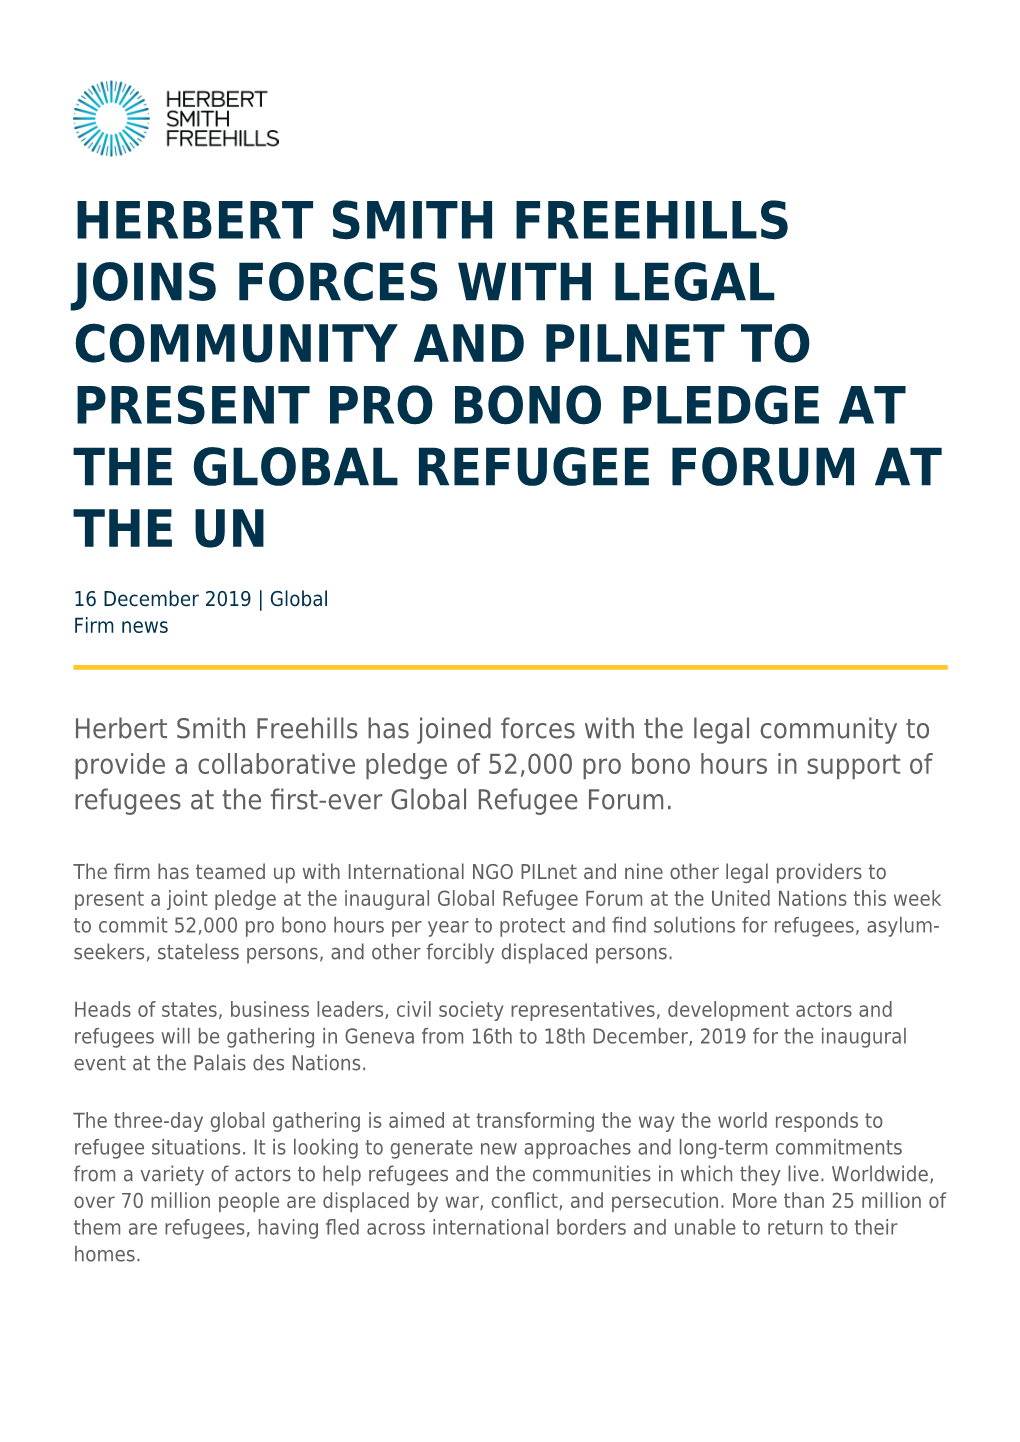 Herbert Smith Freehills Joins Forces with Legal Community and Pilnet to Present Pro Bono Pledge at the Global Refugee Forum at the Un